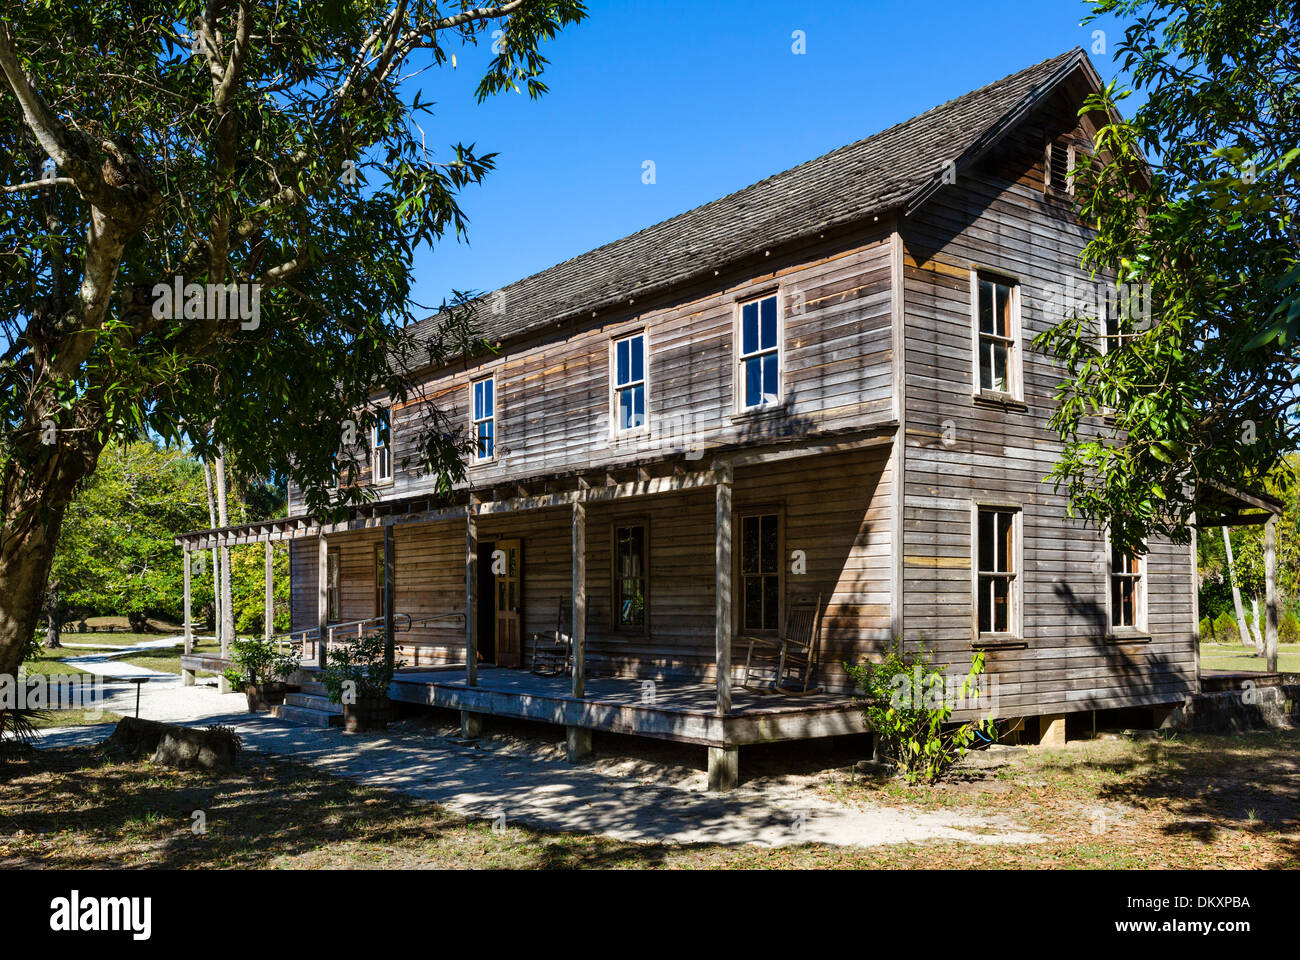 The Founder's Home, house of Koreshan founder Dr Cyrus R Teed, Koreshan State Historic Park, Estero, nr Fort Myers, Florida, USA Stock Photo